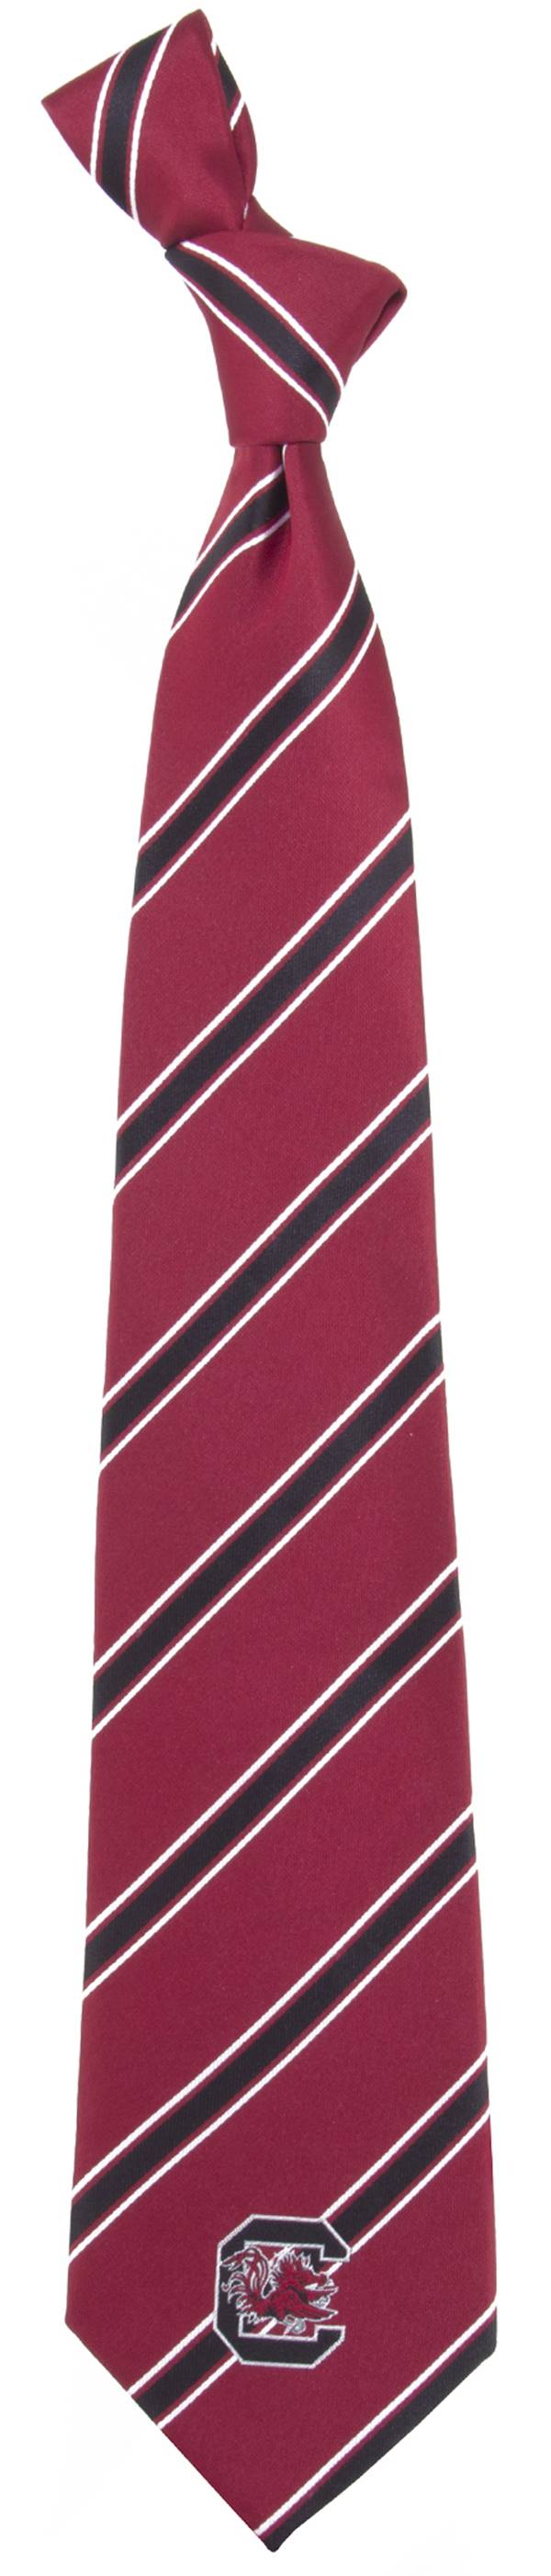 Eagles Wings South Carolina Gamecocks Woven Poly 1 Necktie product image